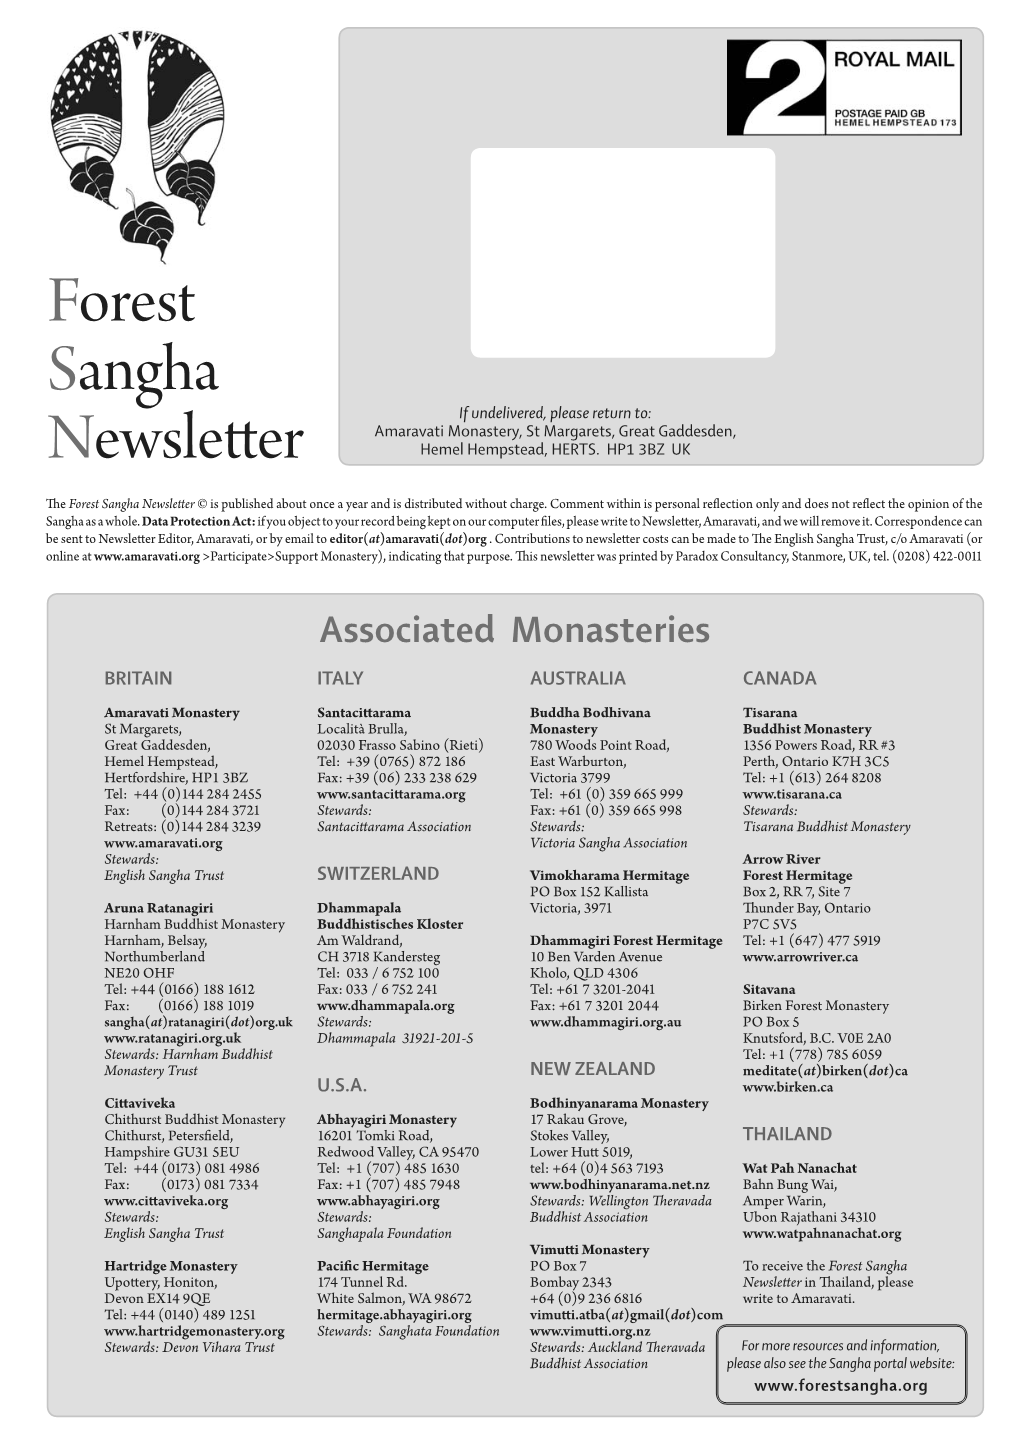 Forest Sangha Newsletter © Is Published About Once a Year and Is Distributed Without Charge